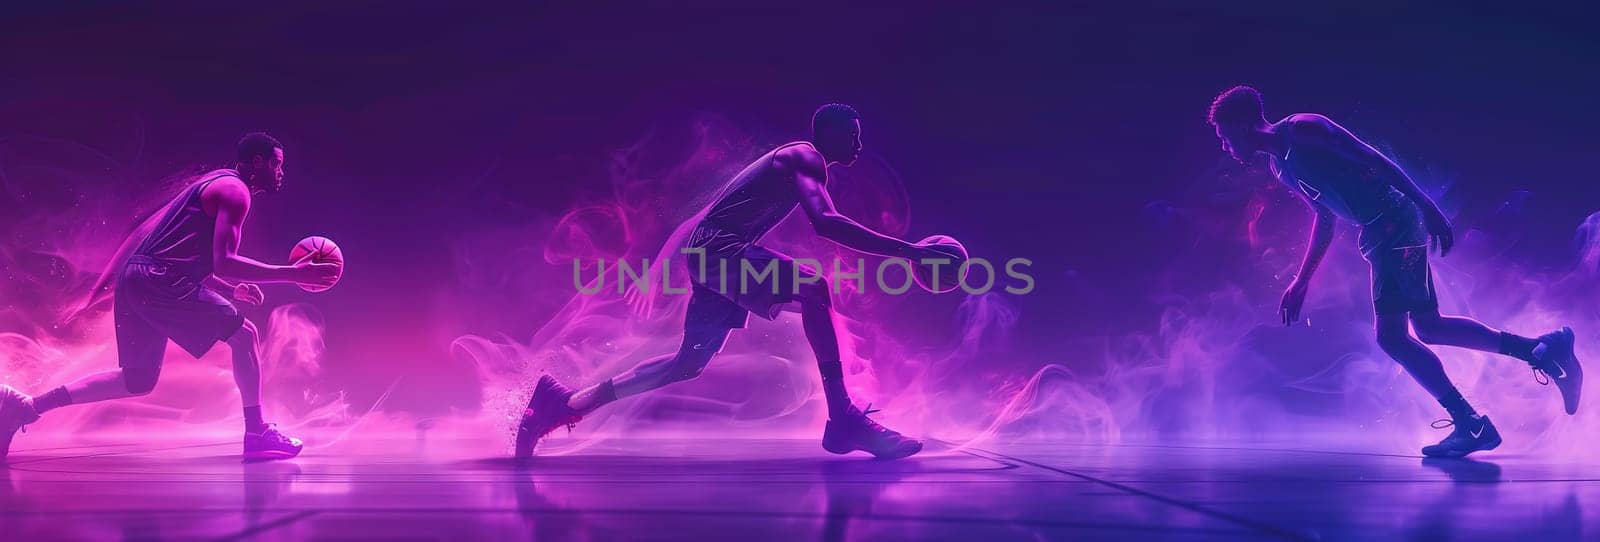 Basketball player players in action. Basketball concept. High quality photo